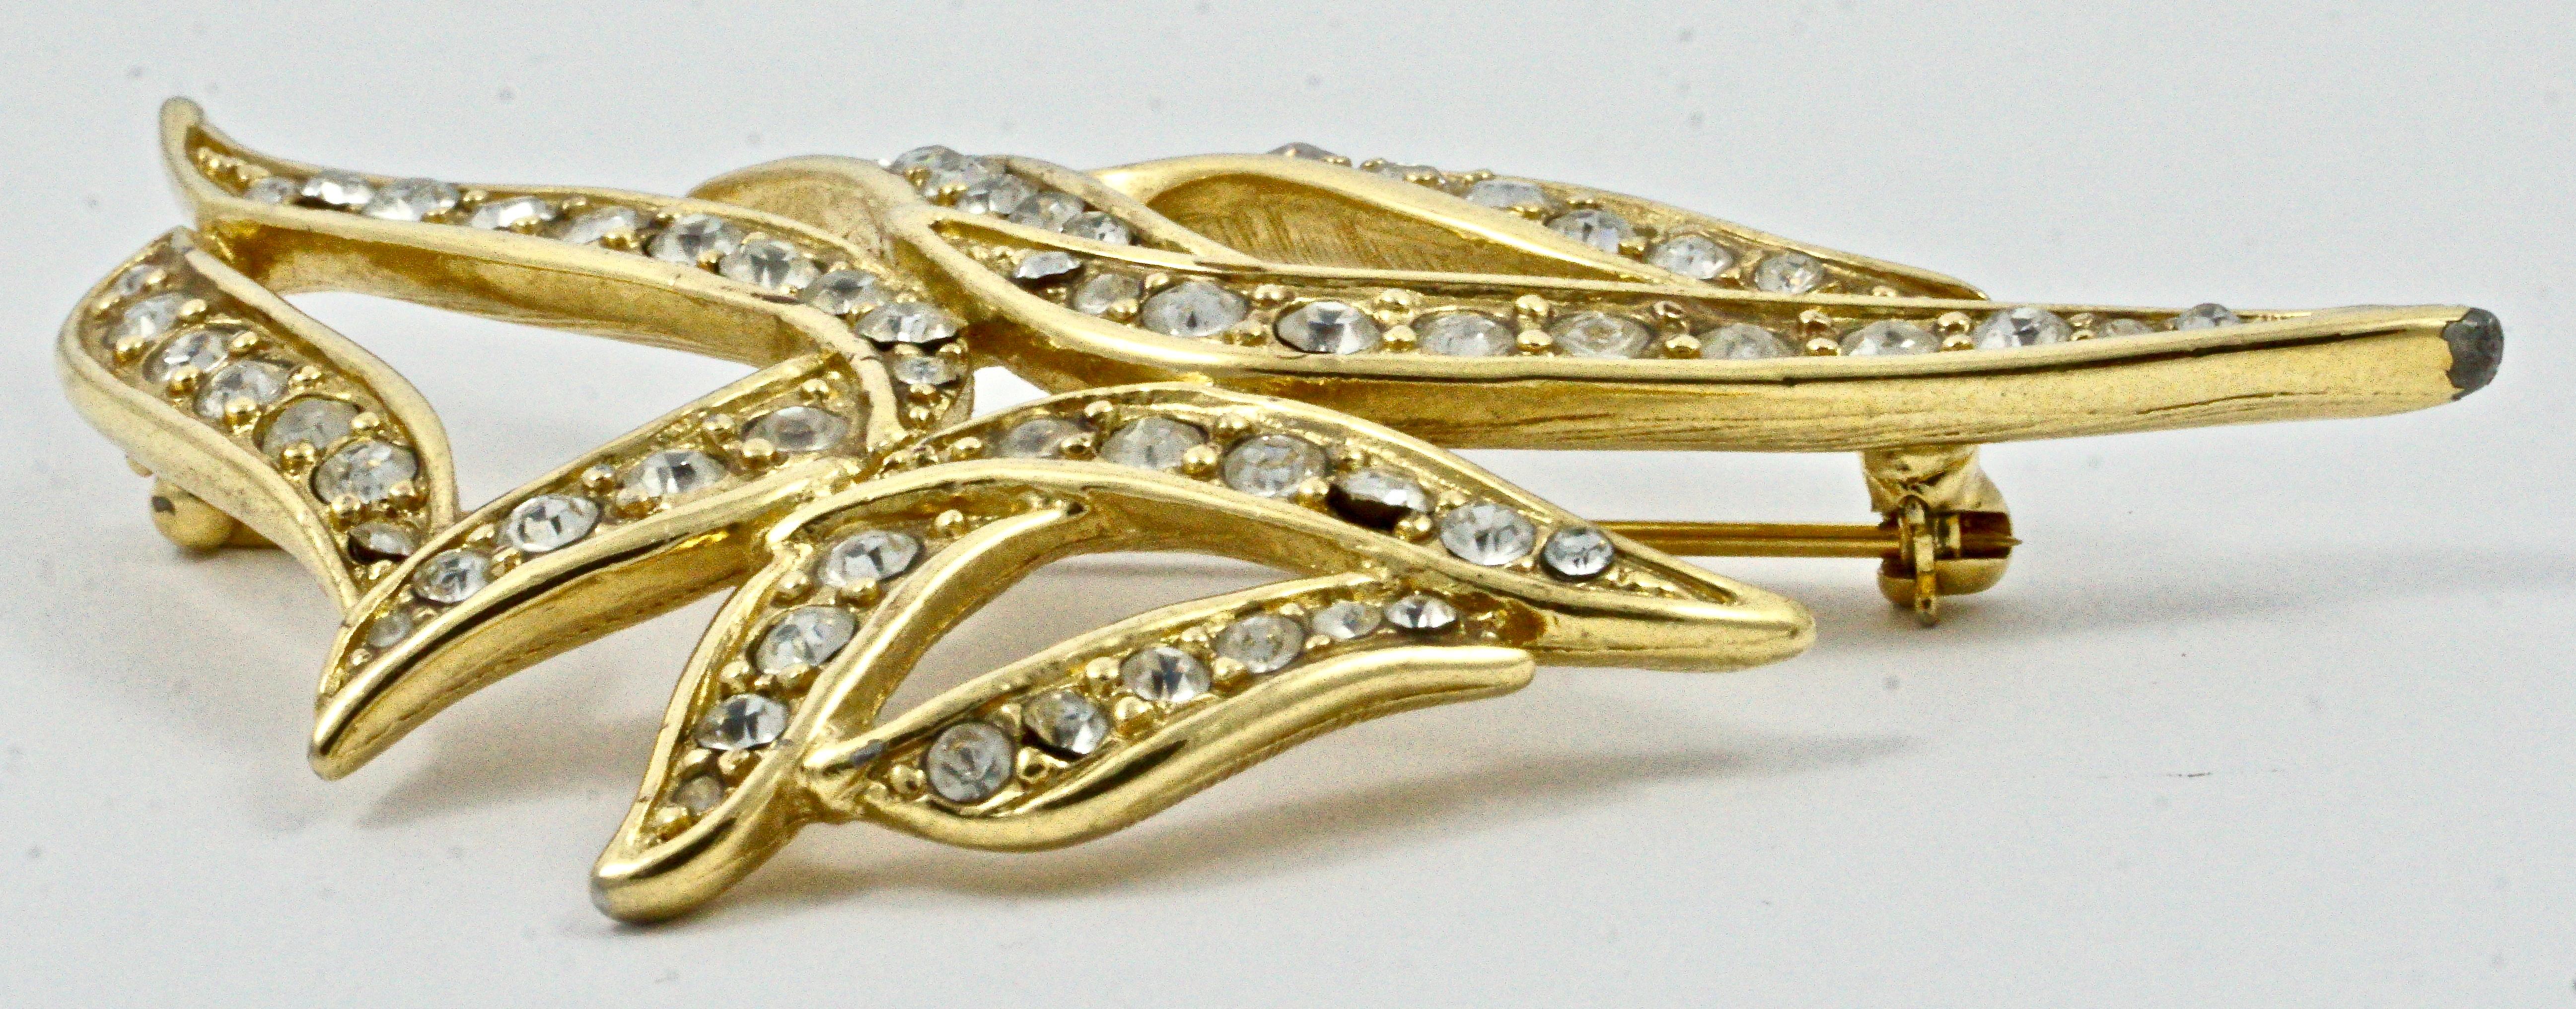 Monet Large Gold Plated and Clear Rhinestone Brooch circa 1980s 1